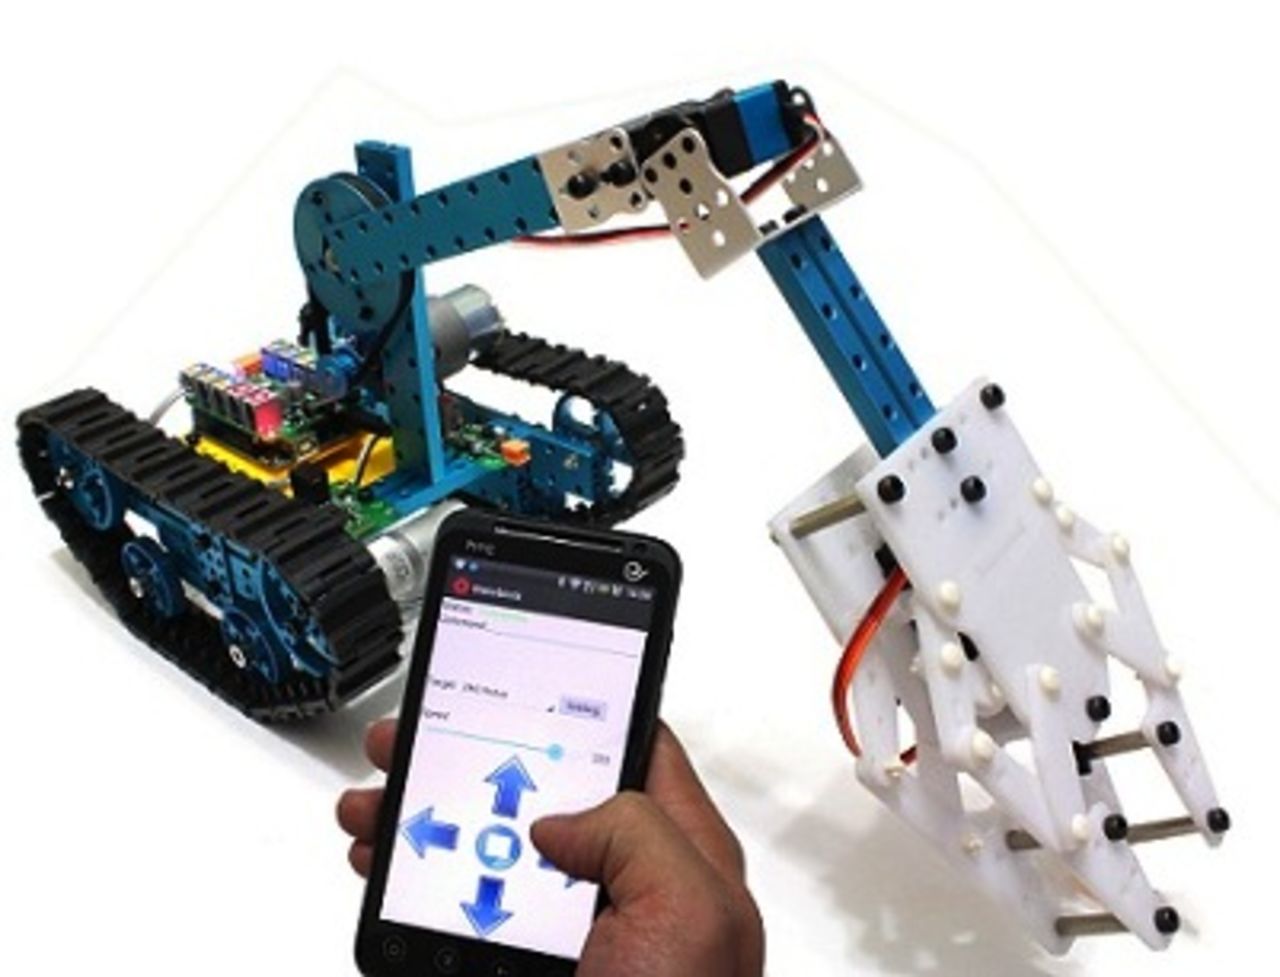 Makeblock founder Jasen Wang always dreamed of making robotics accessible to normal people. This robot can be remotely controlled with a smartphone via bluetooth.